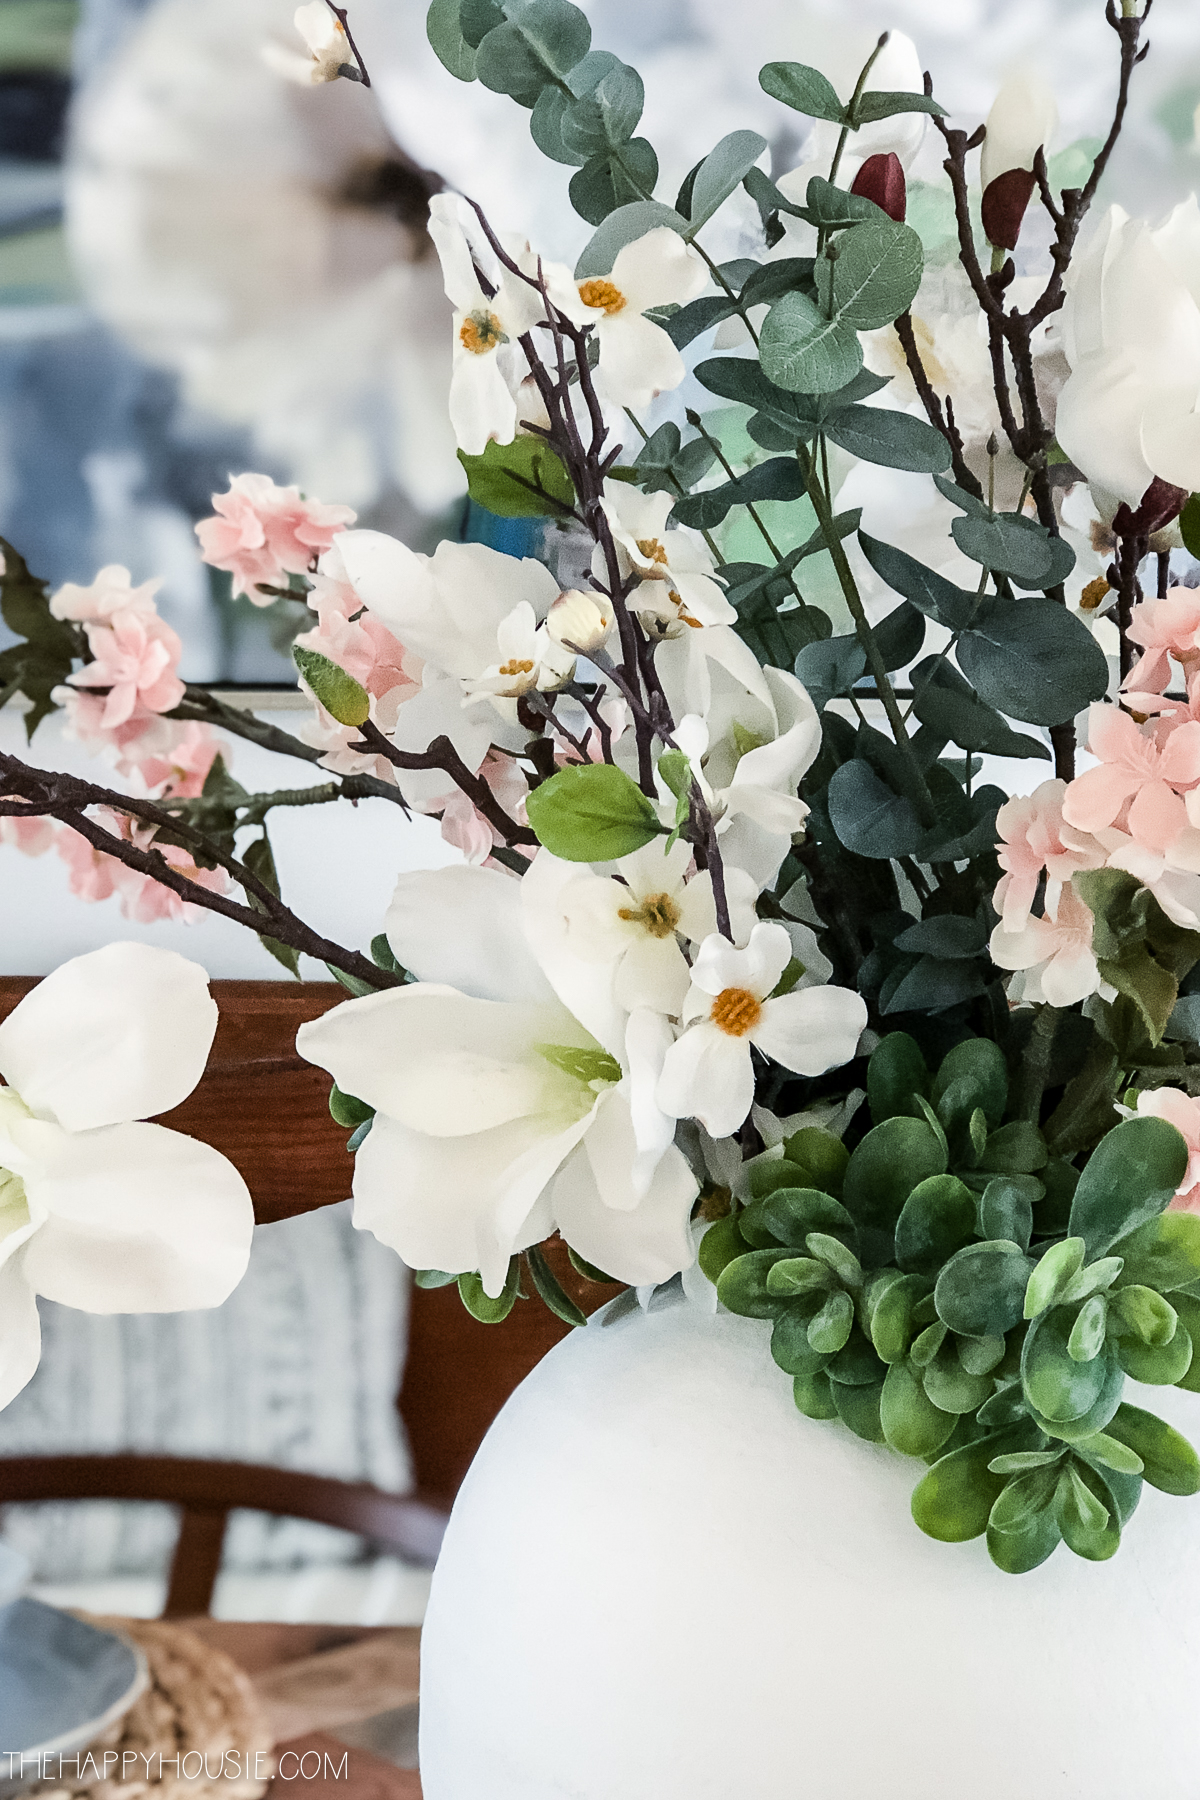 White, pink and green florals in the vase.